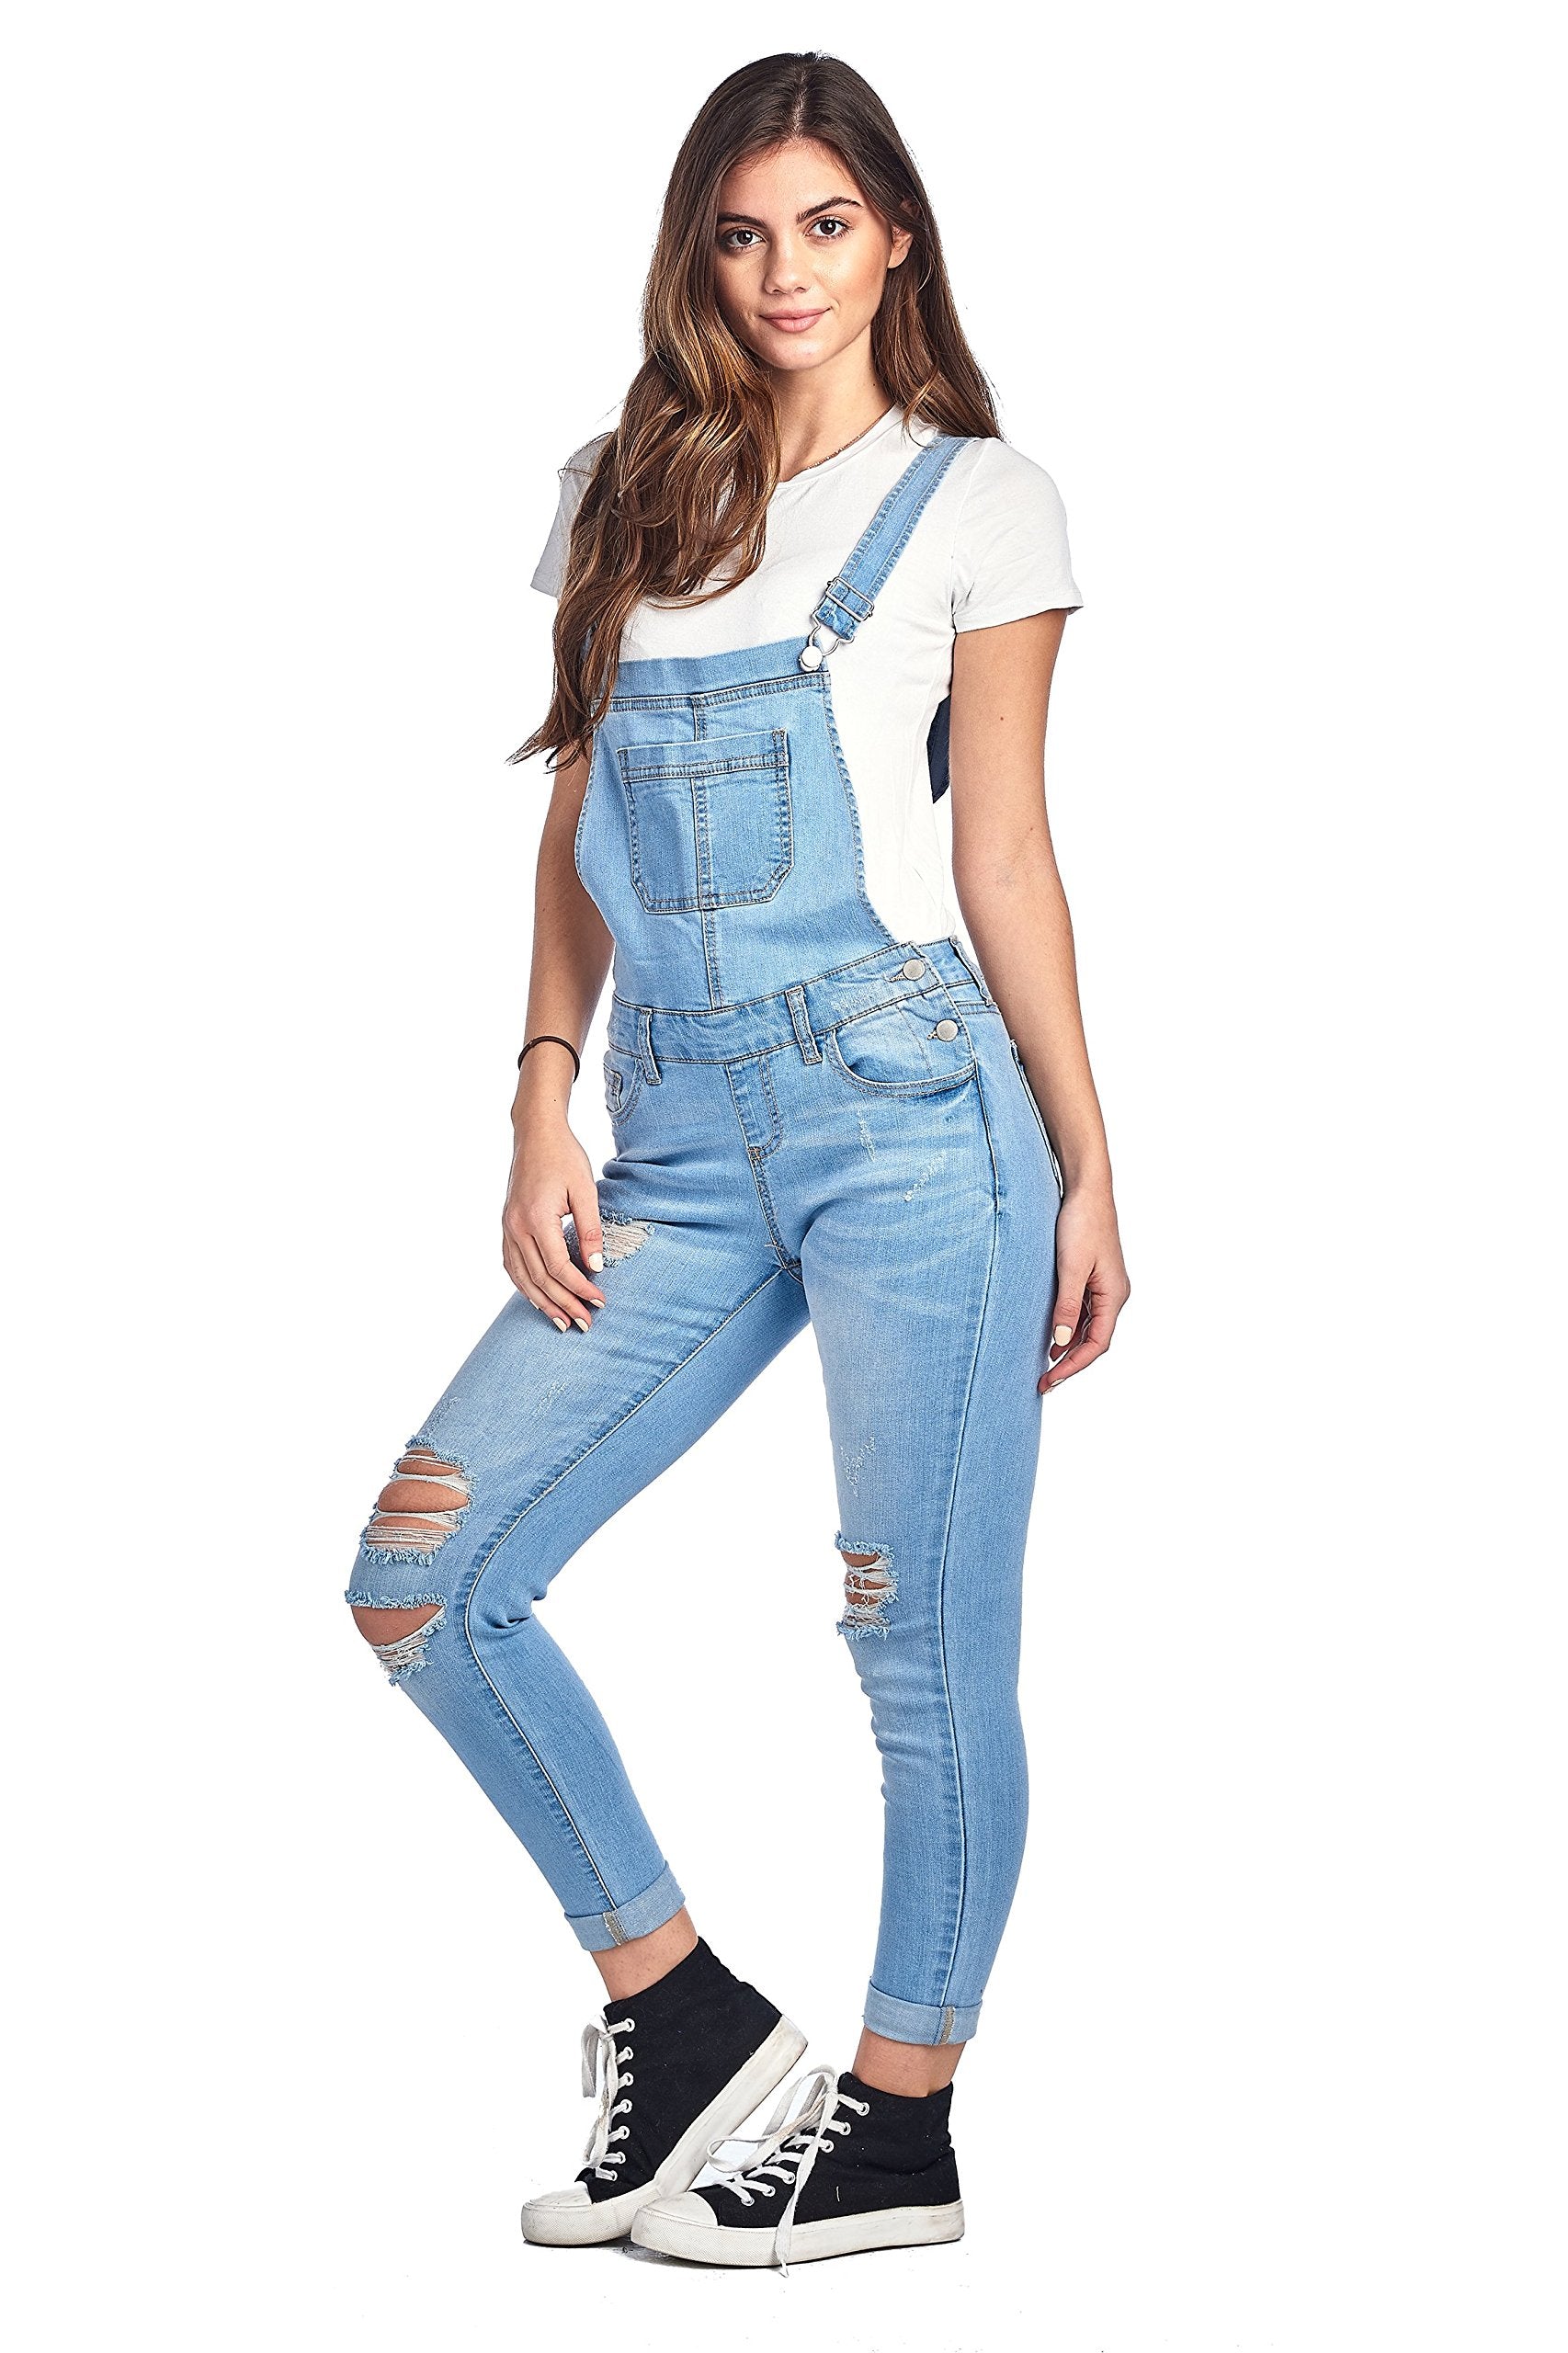 Denim Distressed Rolled Cuff Ankle Length Adjustable Straps Skinny Jean Overalls